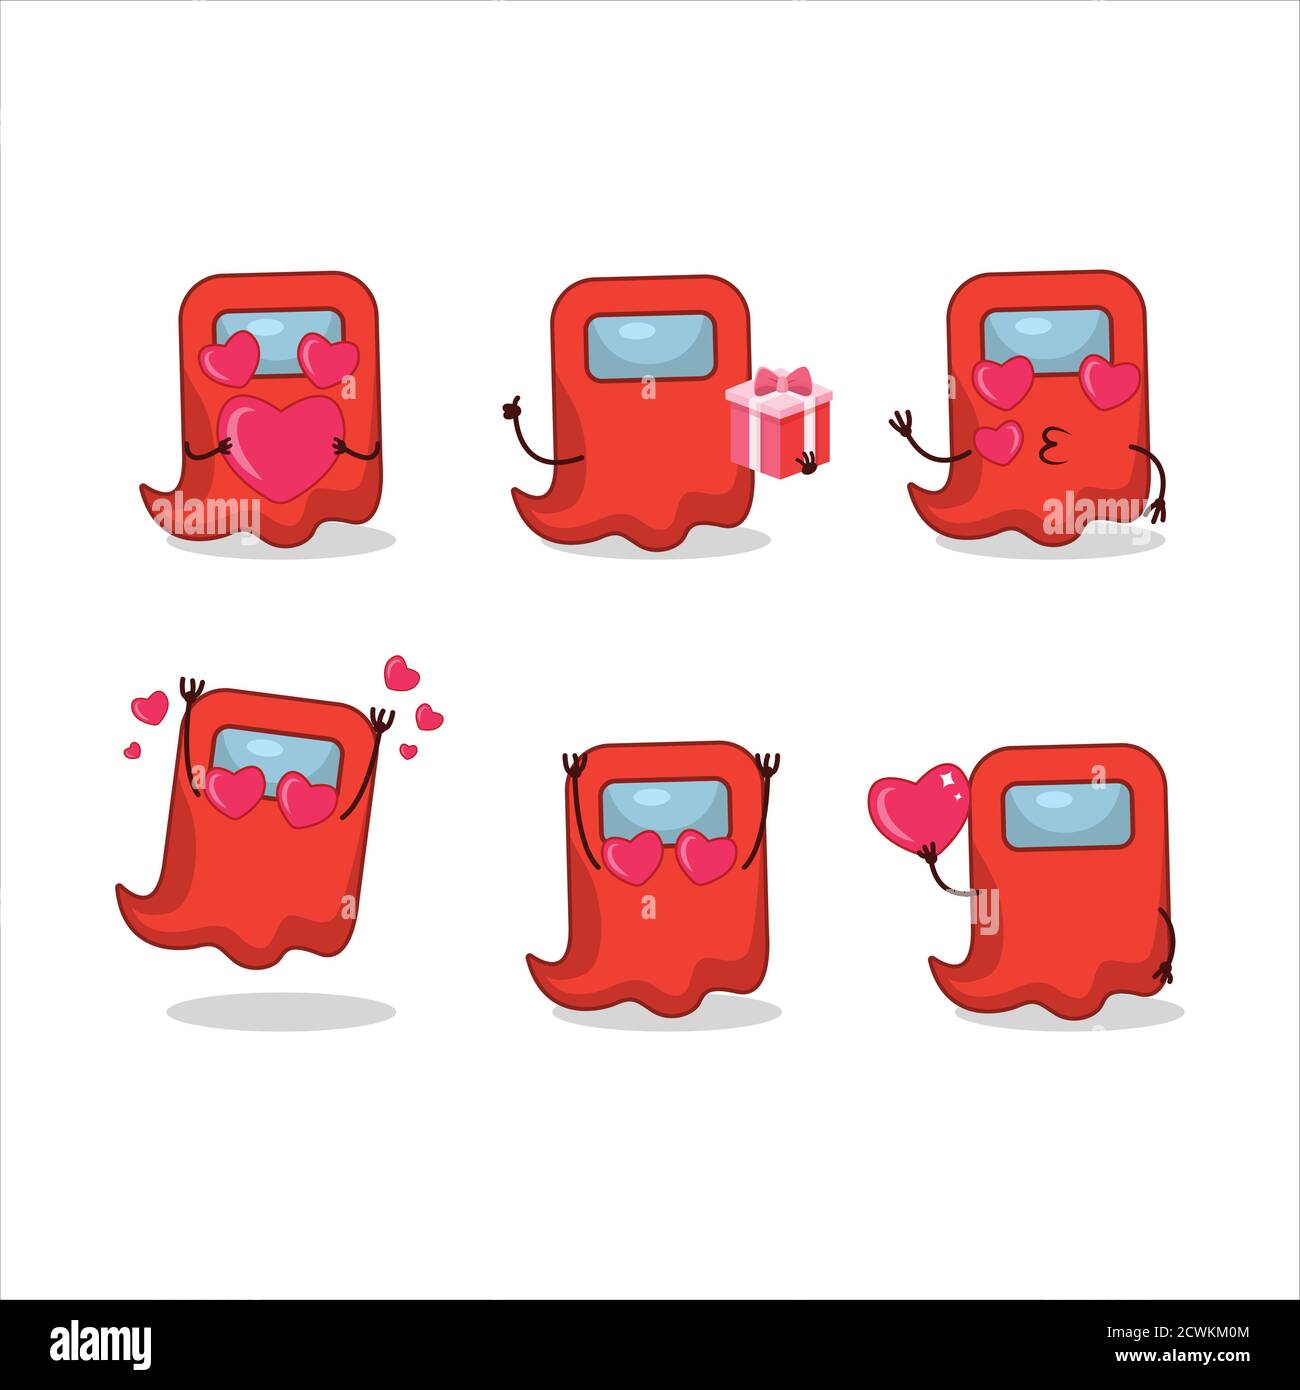 Ghost among us red cartoon character with love cute emoticon Stock Vector